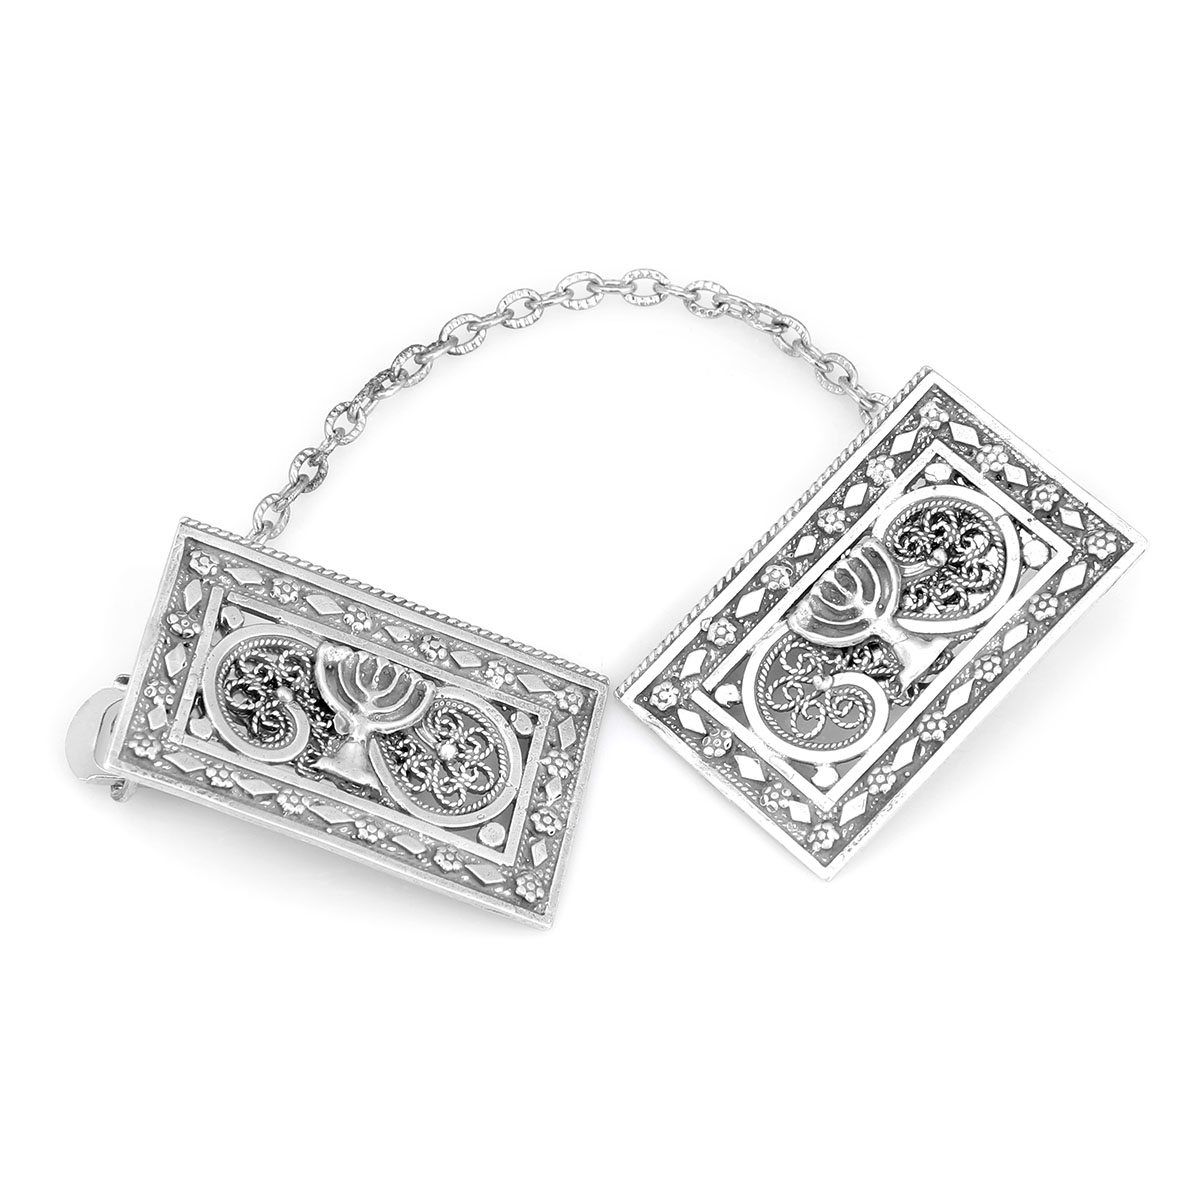 Traditional Yemenite Art Handcrafted Sterling Silver Tallit Clips With Menorah Design - 1